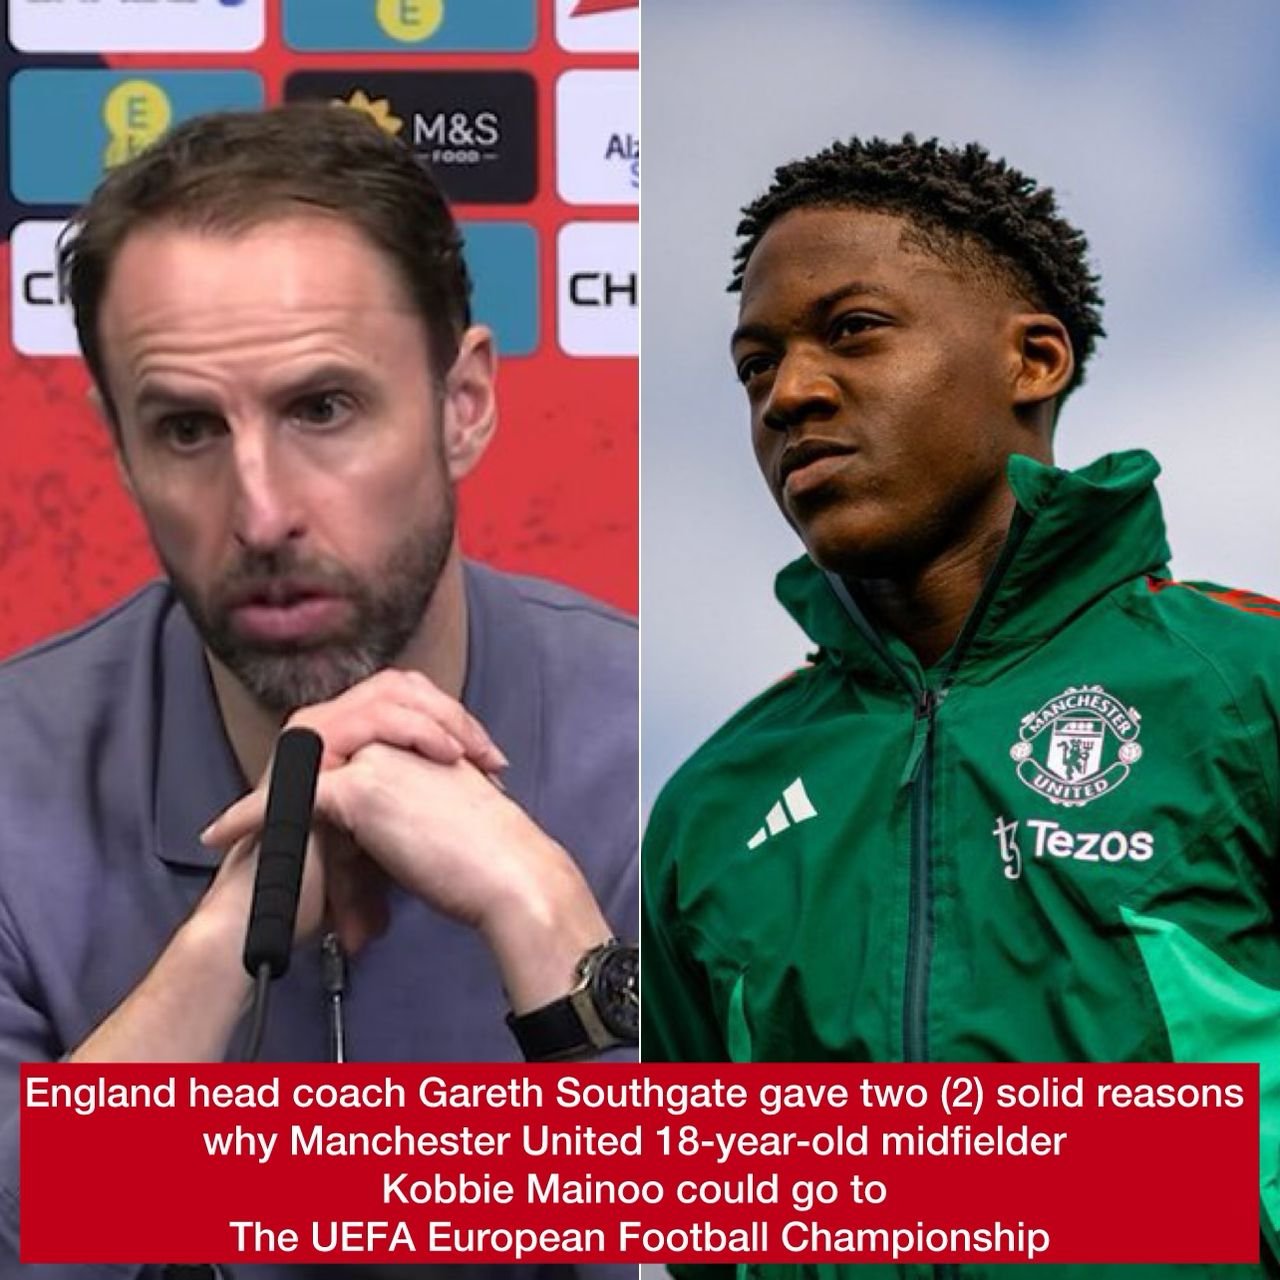 England head coach Gareth Southgate gave two (2) solid reasons why Manchester United 18-year-old midfielder Kobbie Mainoo could go to The UEFA European Football Championship